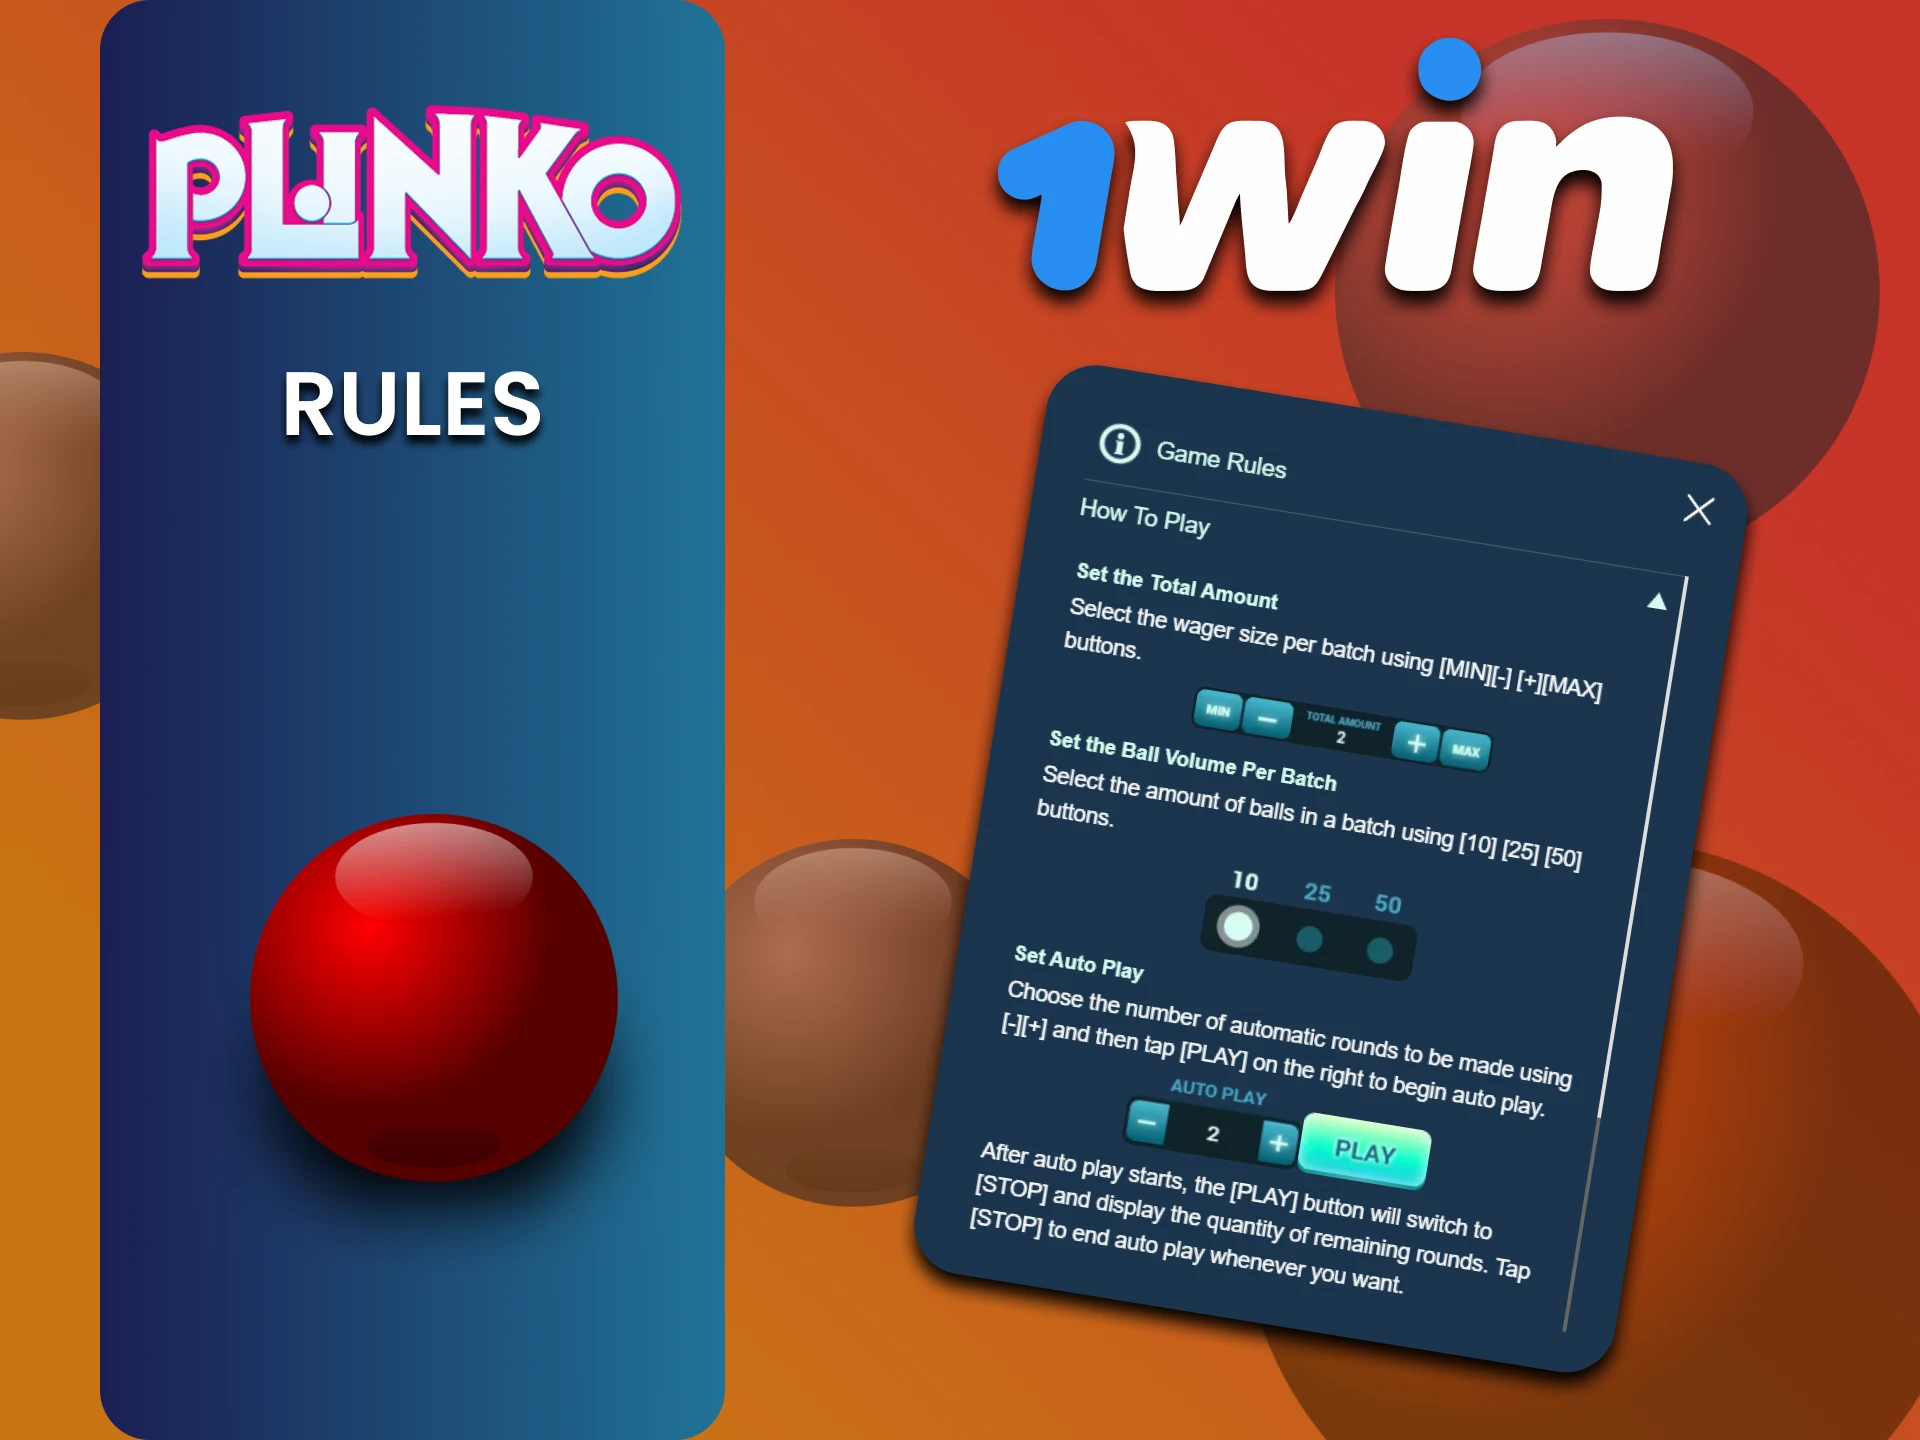 Find out about the rules of the Plinko game on 1win.